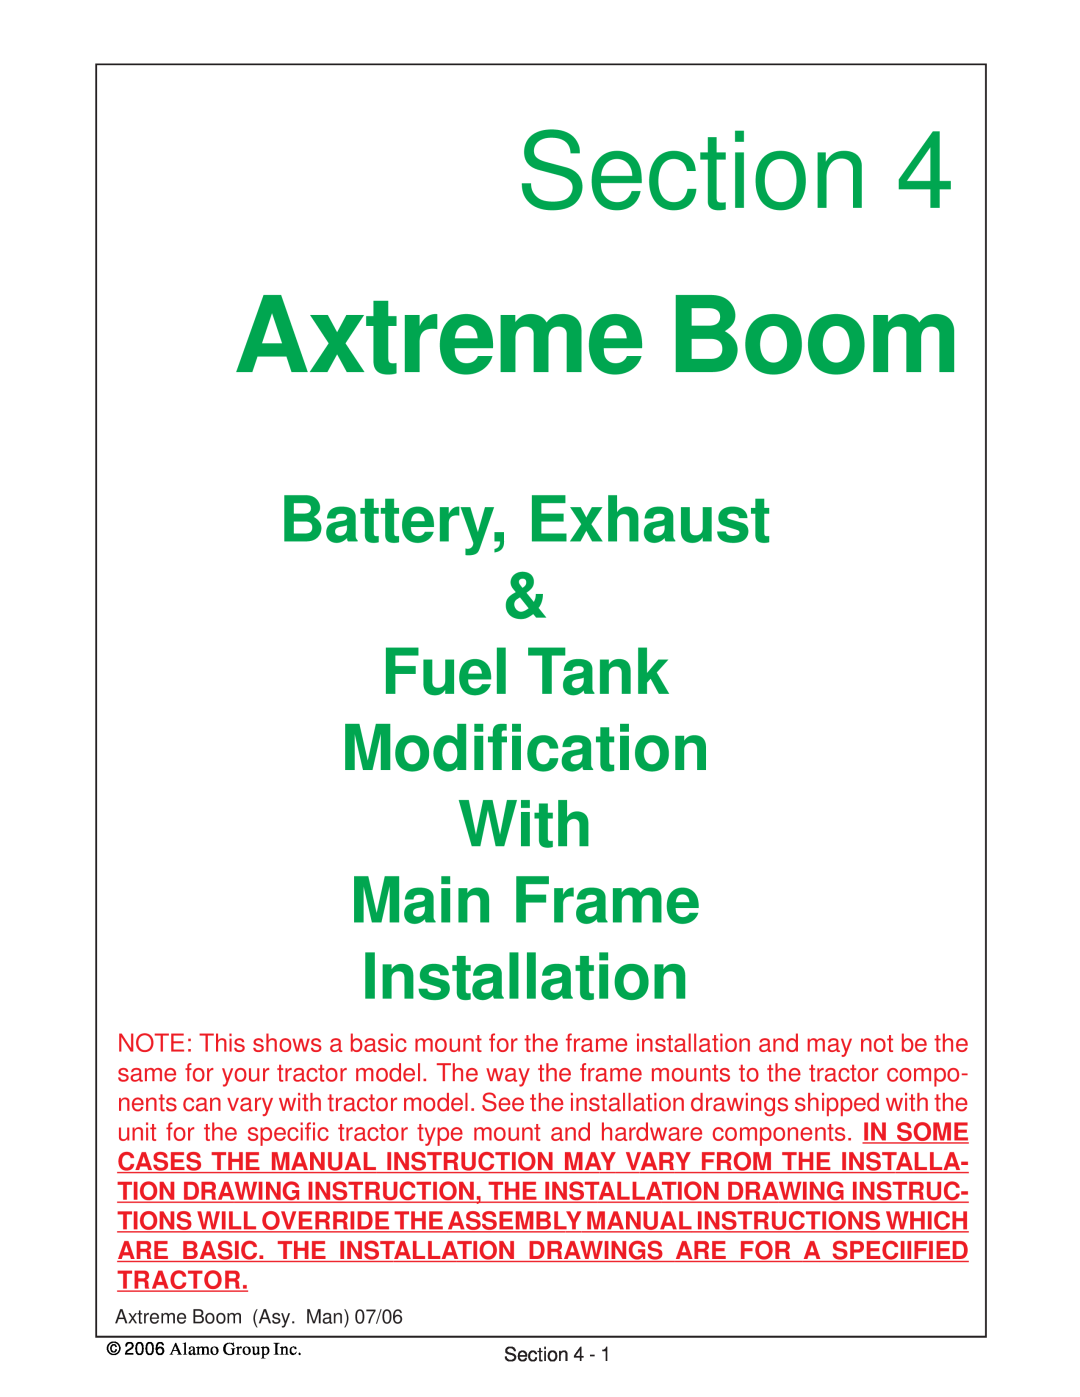 Alamo 02984405 Battery, Exhaust, Fuel Tank Modification With Main Frame Installation, Section, Axtreme Boom 